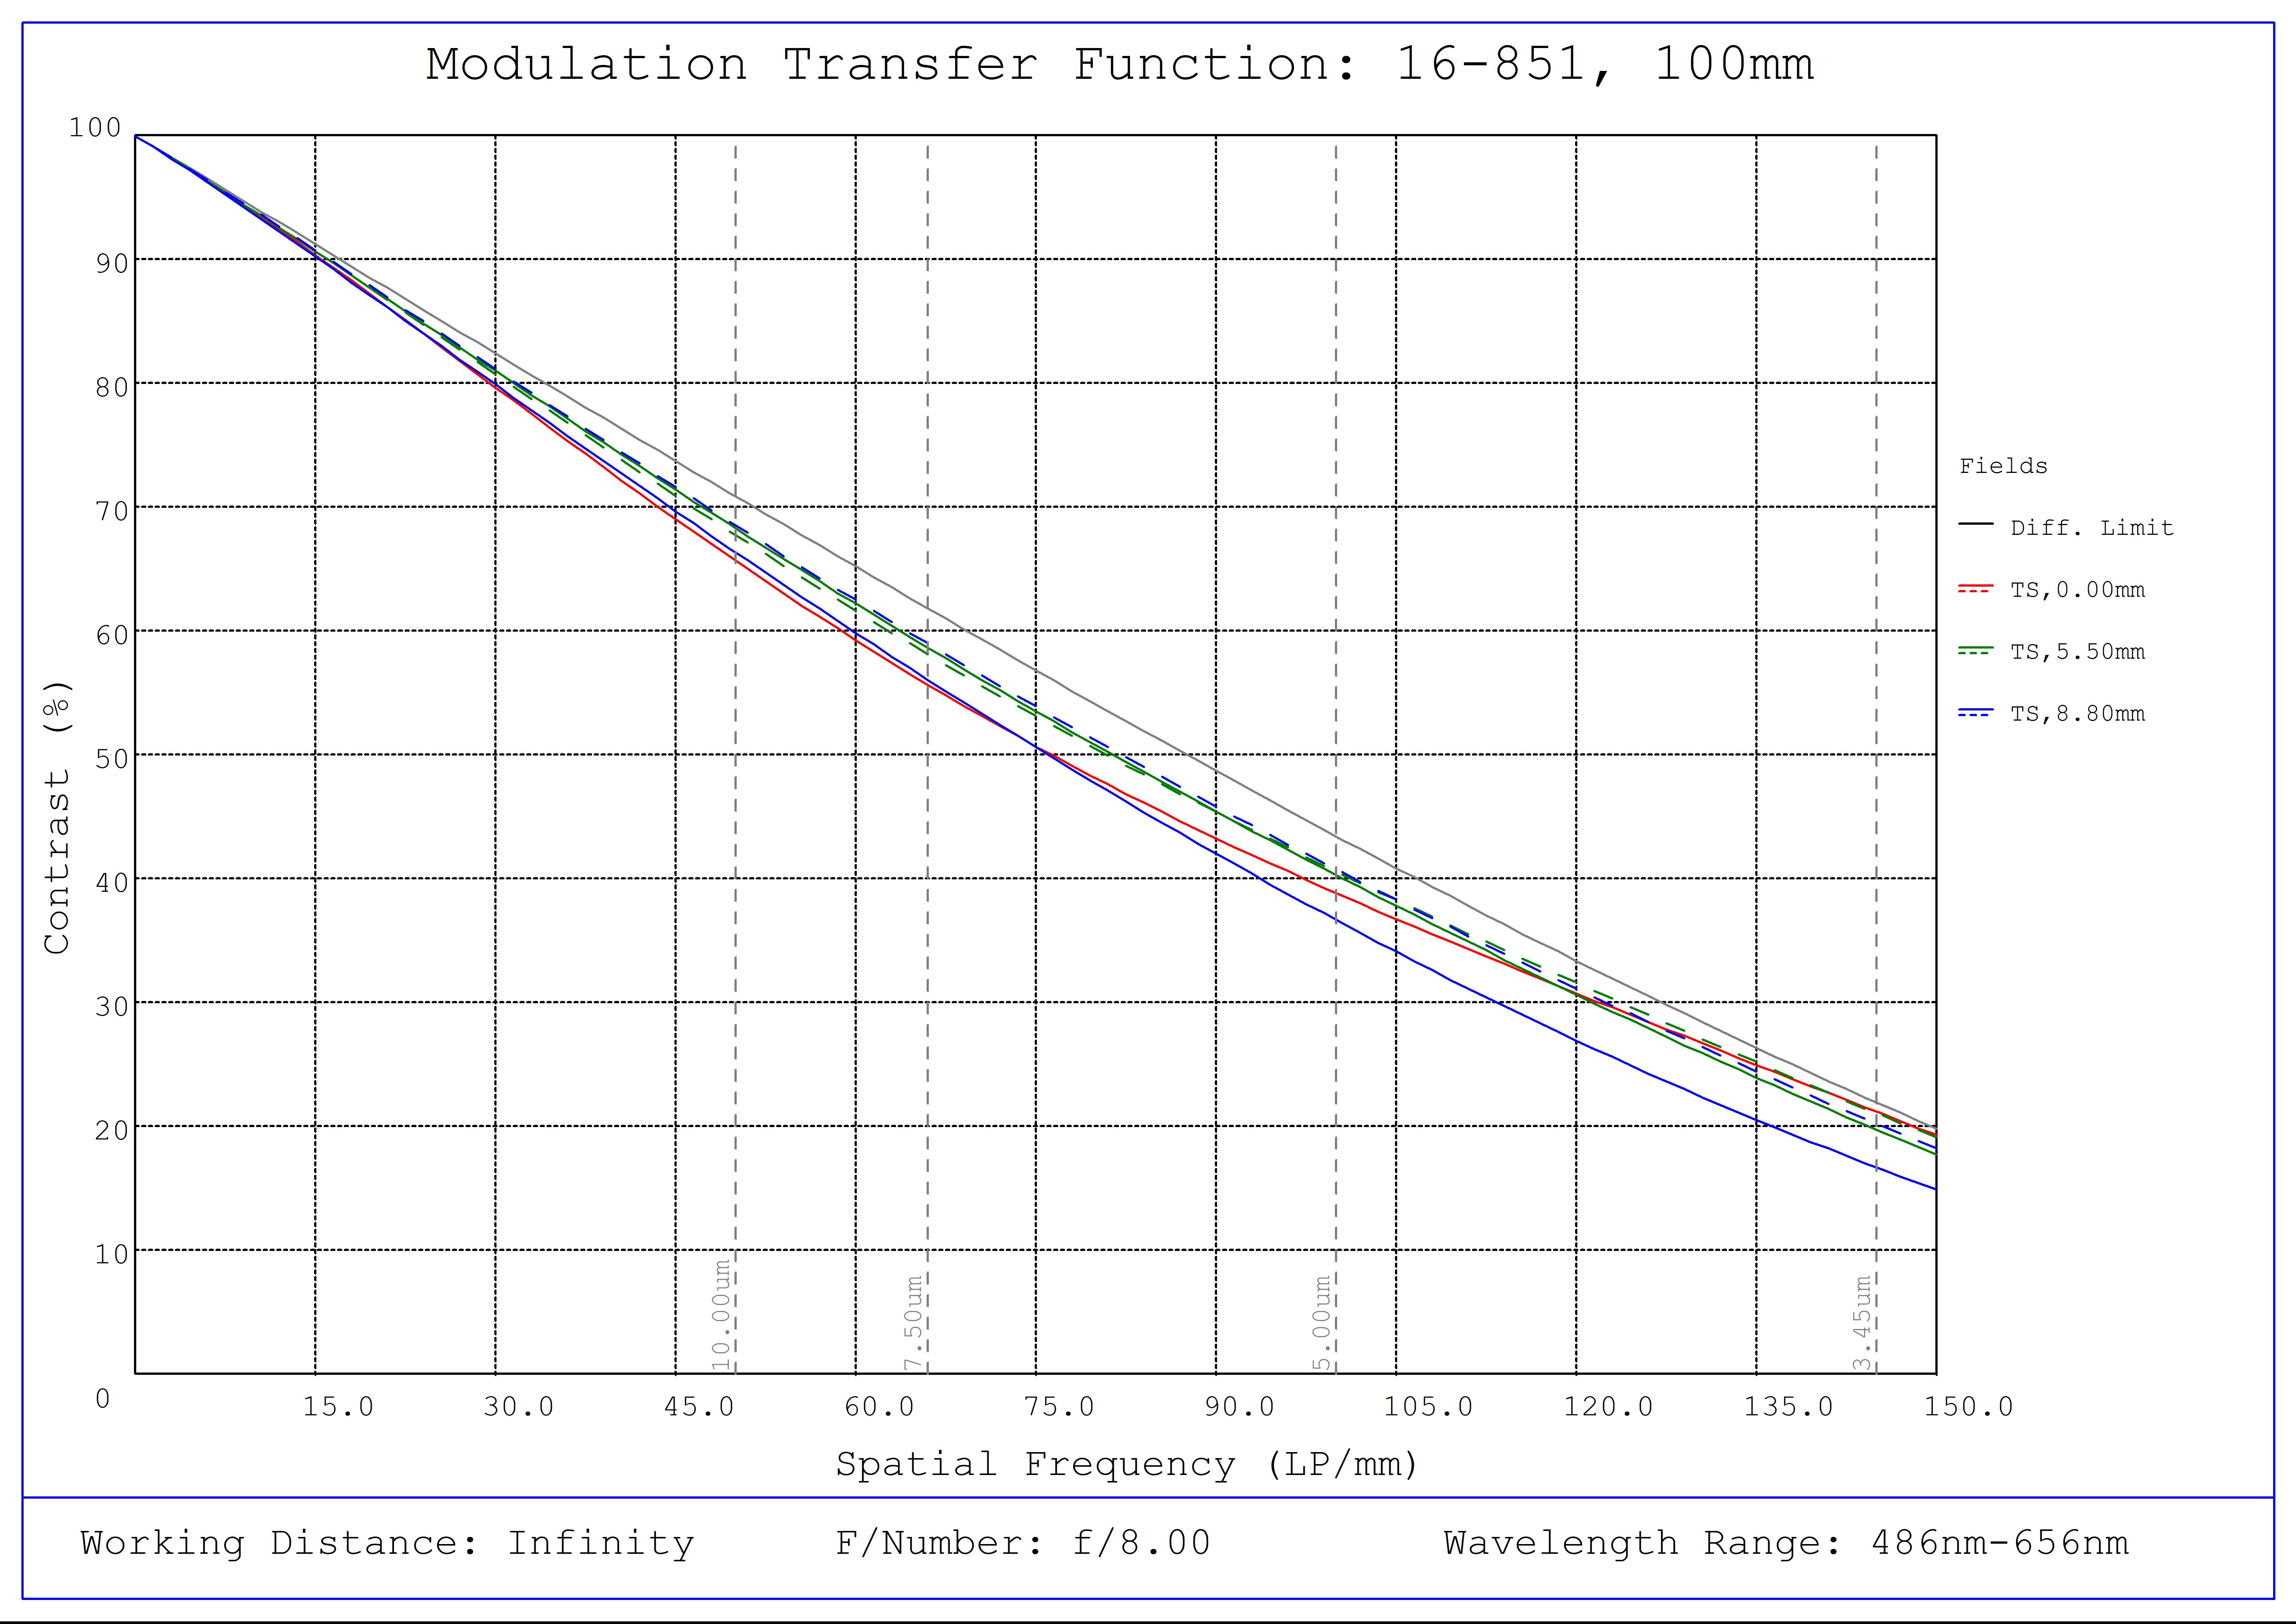 #16-851, 100mm, f/8 Athermal Lens, Modulated Transfer Function (MTF) Plot, Working Distance: Infinity, f8